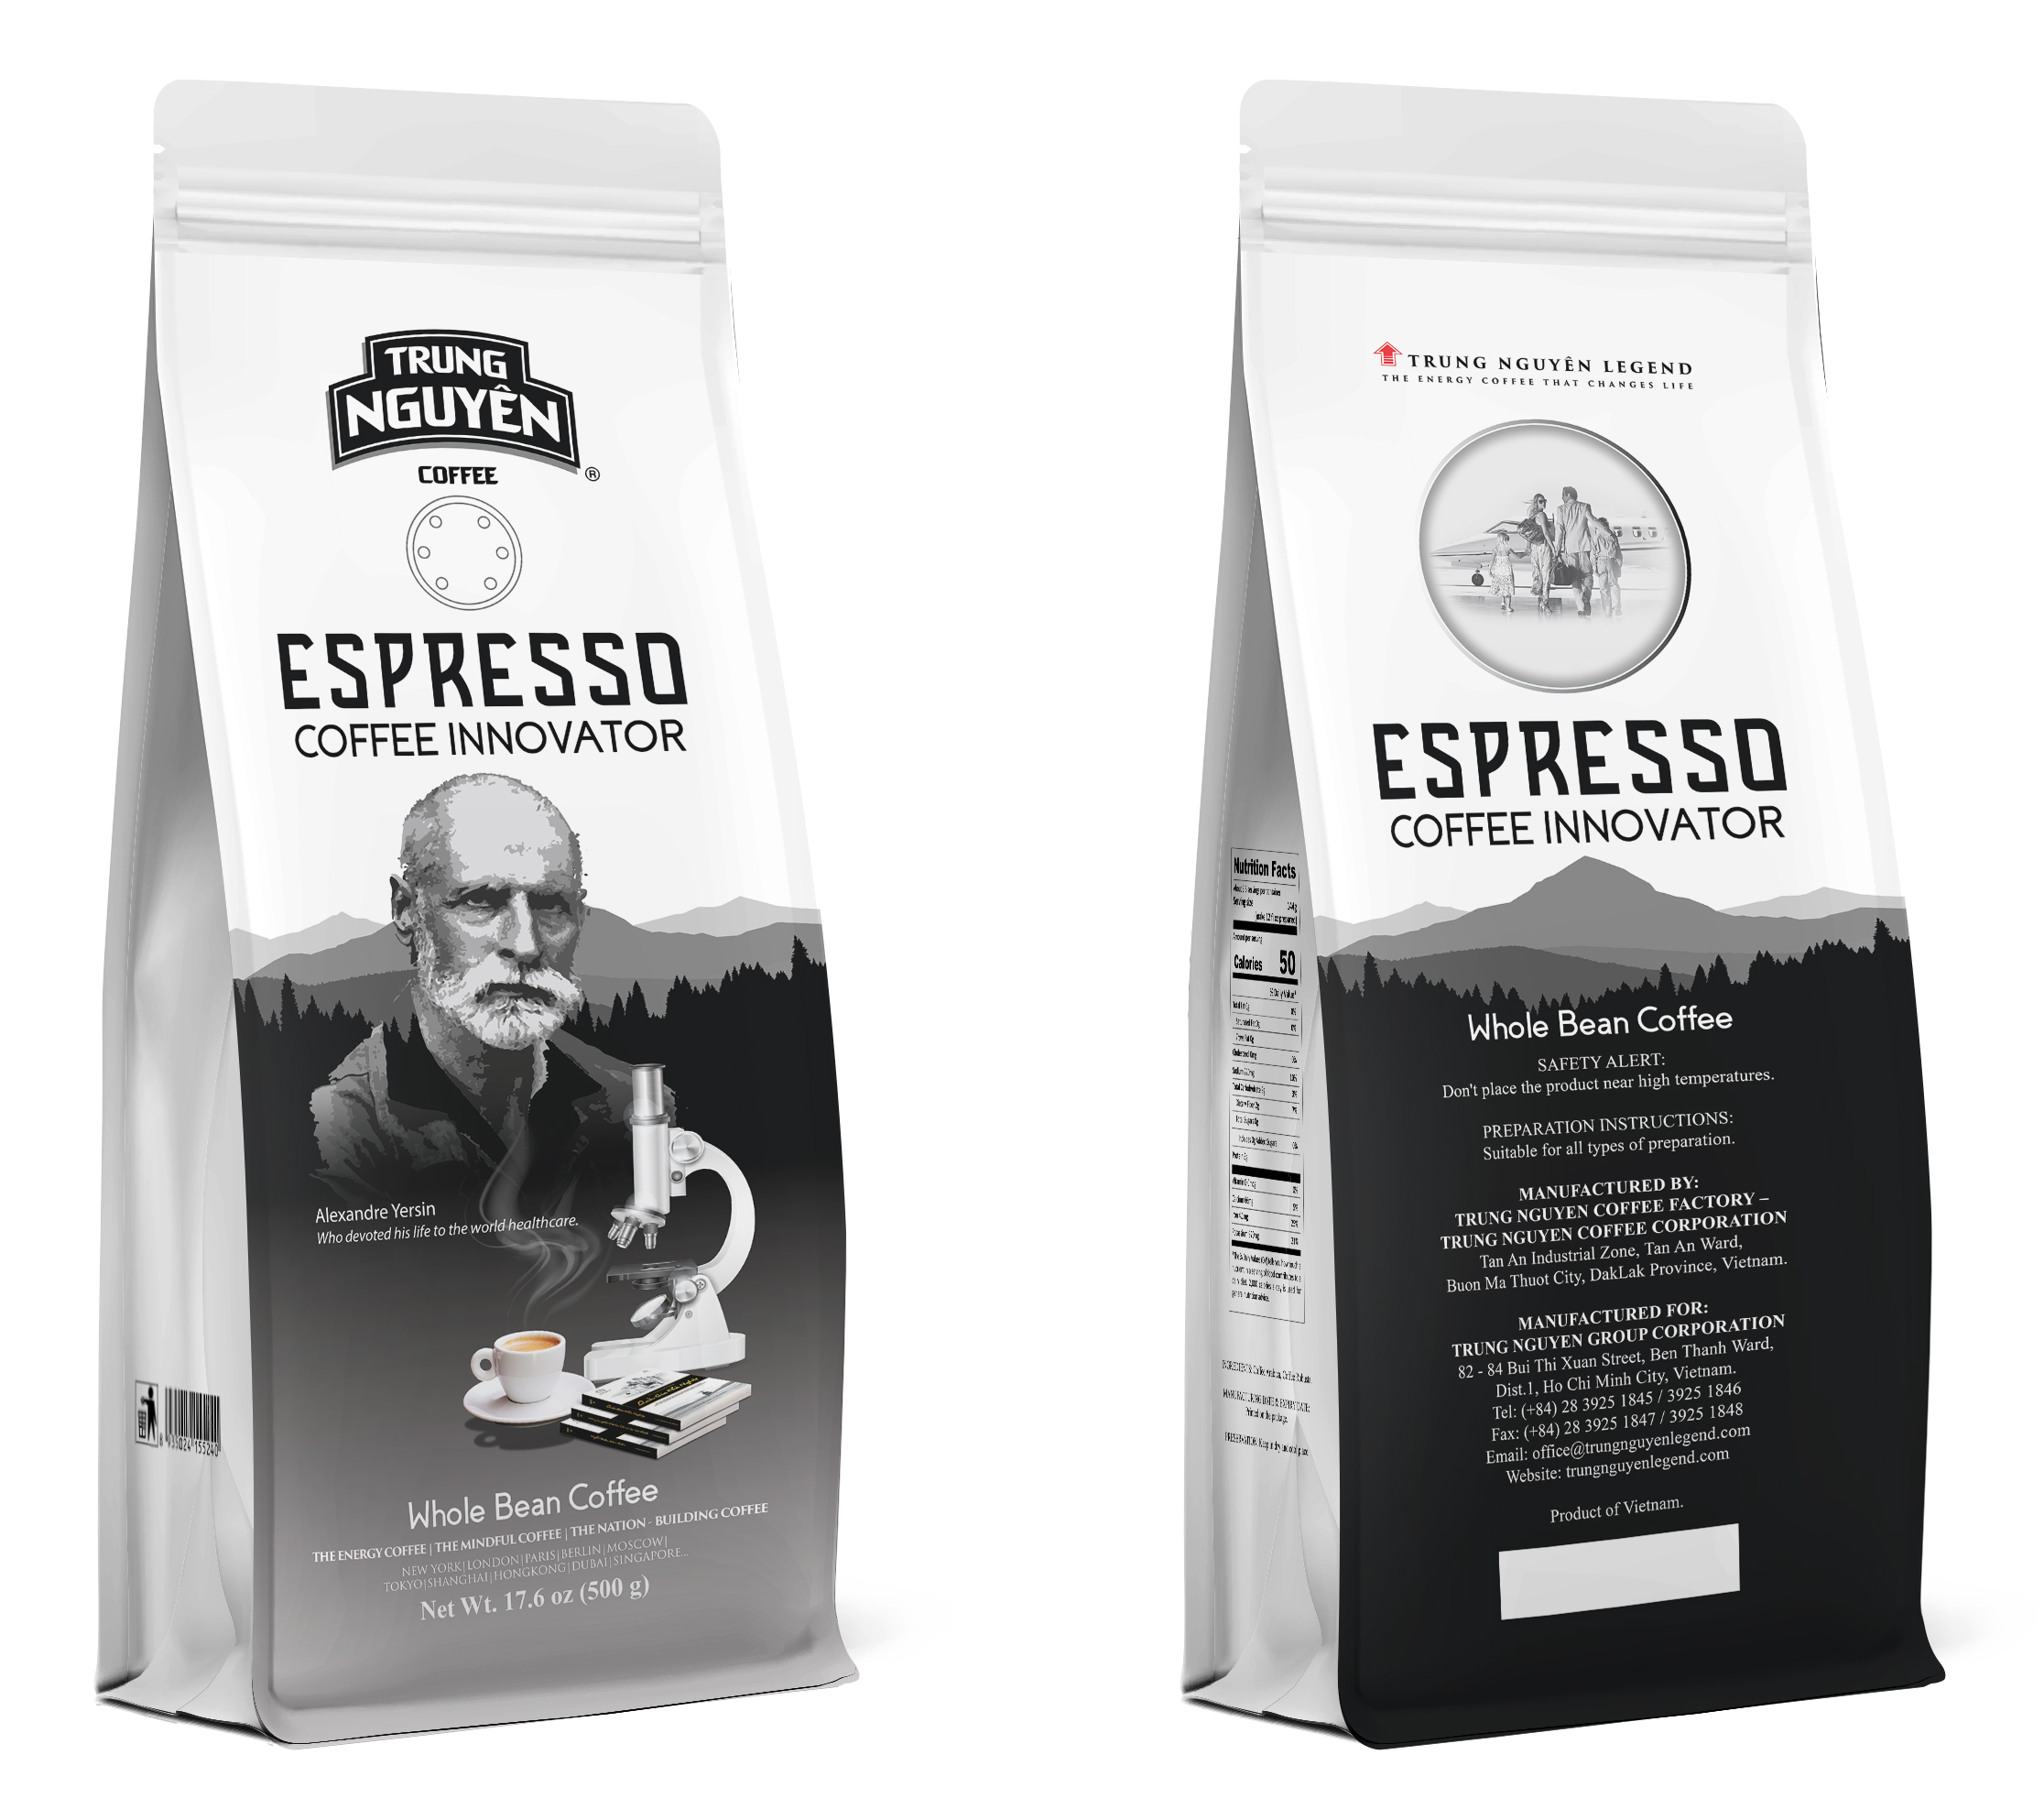 Trung Nguyen Espresso Coffee Innovator Whole Bean (500g)-Whole Coffee bean-Talent Alpha Limited-Talent Alpha-Talent Alpha Limited-Trung Nguyen咖啡-越南G7-中原咖啡-進口咖啡-Hong Kong Coffee Beans-咖啡膠囊-香港咖啡-智利葡萄酒-越南創意咖啡-香港咖啡粉-咖啡豆-Hong Kong Coffee-Vietnamese Creative Coffee-Vietnamese Coffee-HK coffee lovers-香港咖啡愛好者-掛耳咖啡-香港咖啡豆-咖啡師-紅酒-red wine-Hong Kong Wine-Coffee capsules-Hong Kong coffee-Chilean wine-Vietnam creative coffee-Hong Kong coffee powder-coffee beans